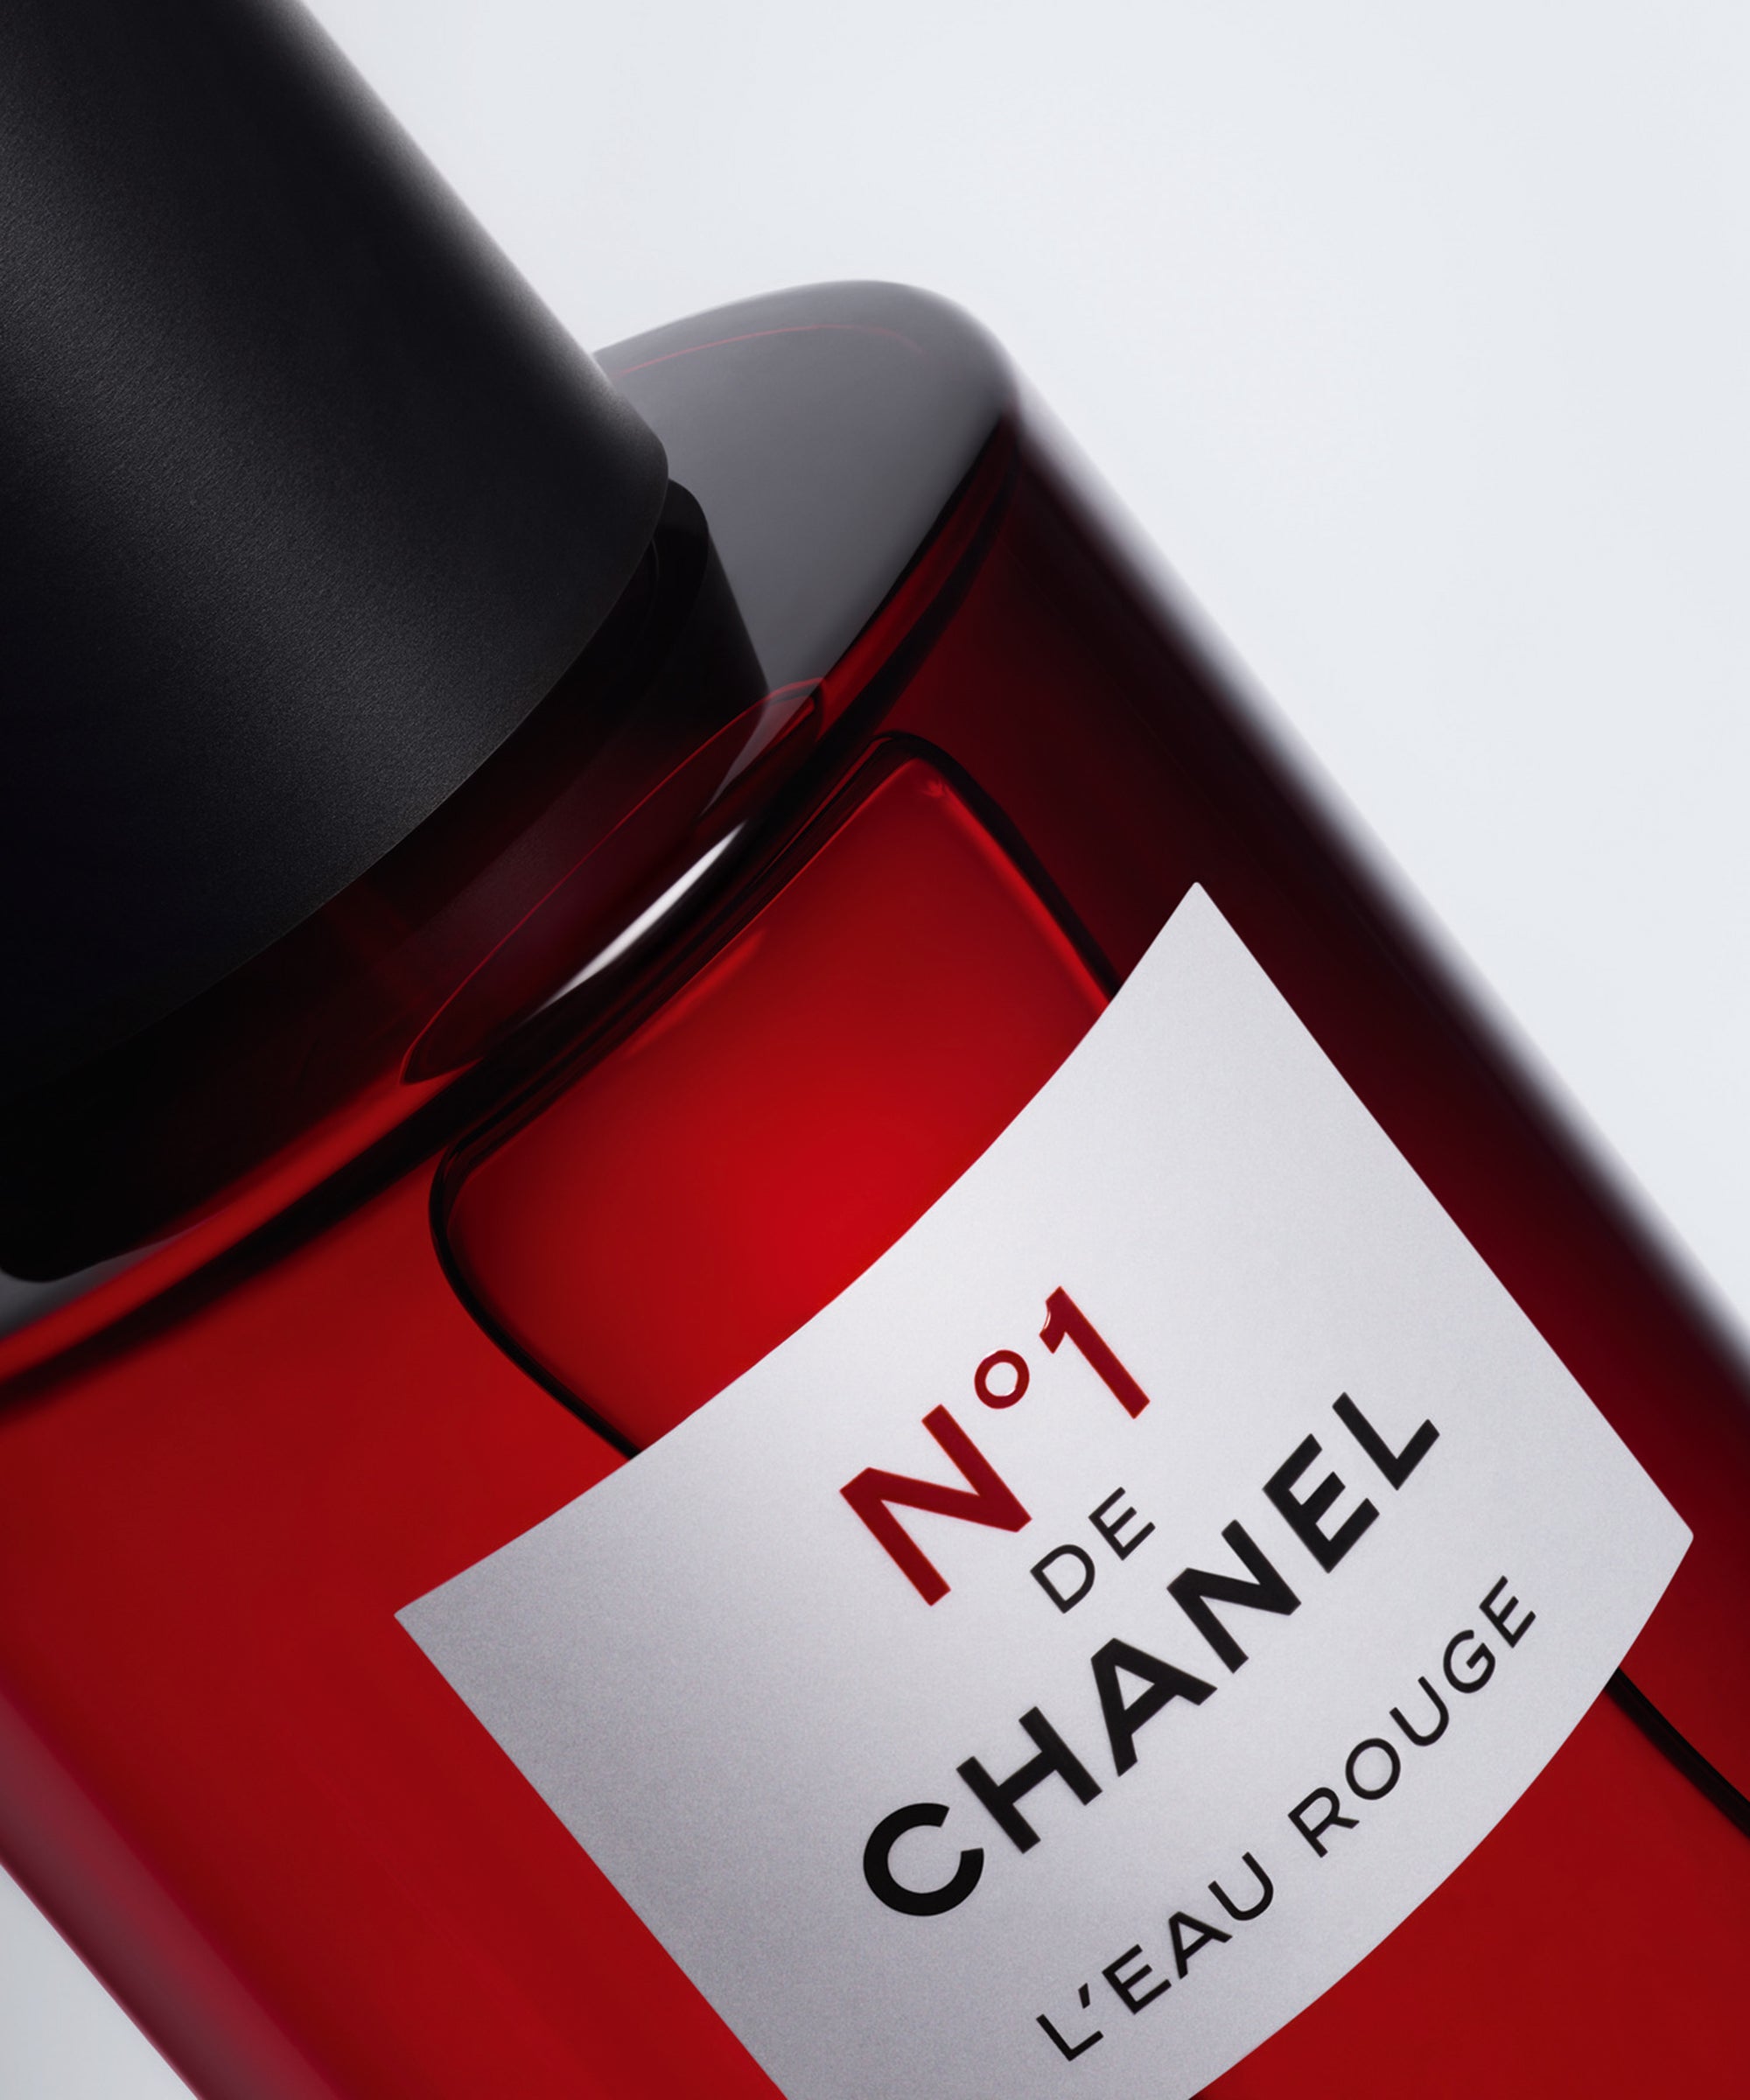 CHANEL RED BOTTLE N5 EDP and LEAU unboxing and review  Limited Edition  CHANEL No5 perfume  YouTube